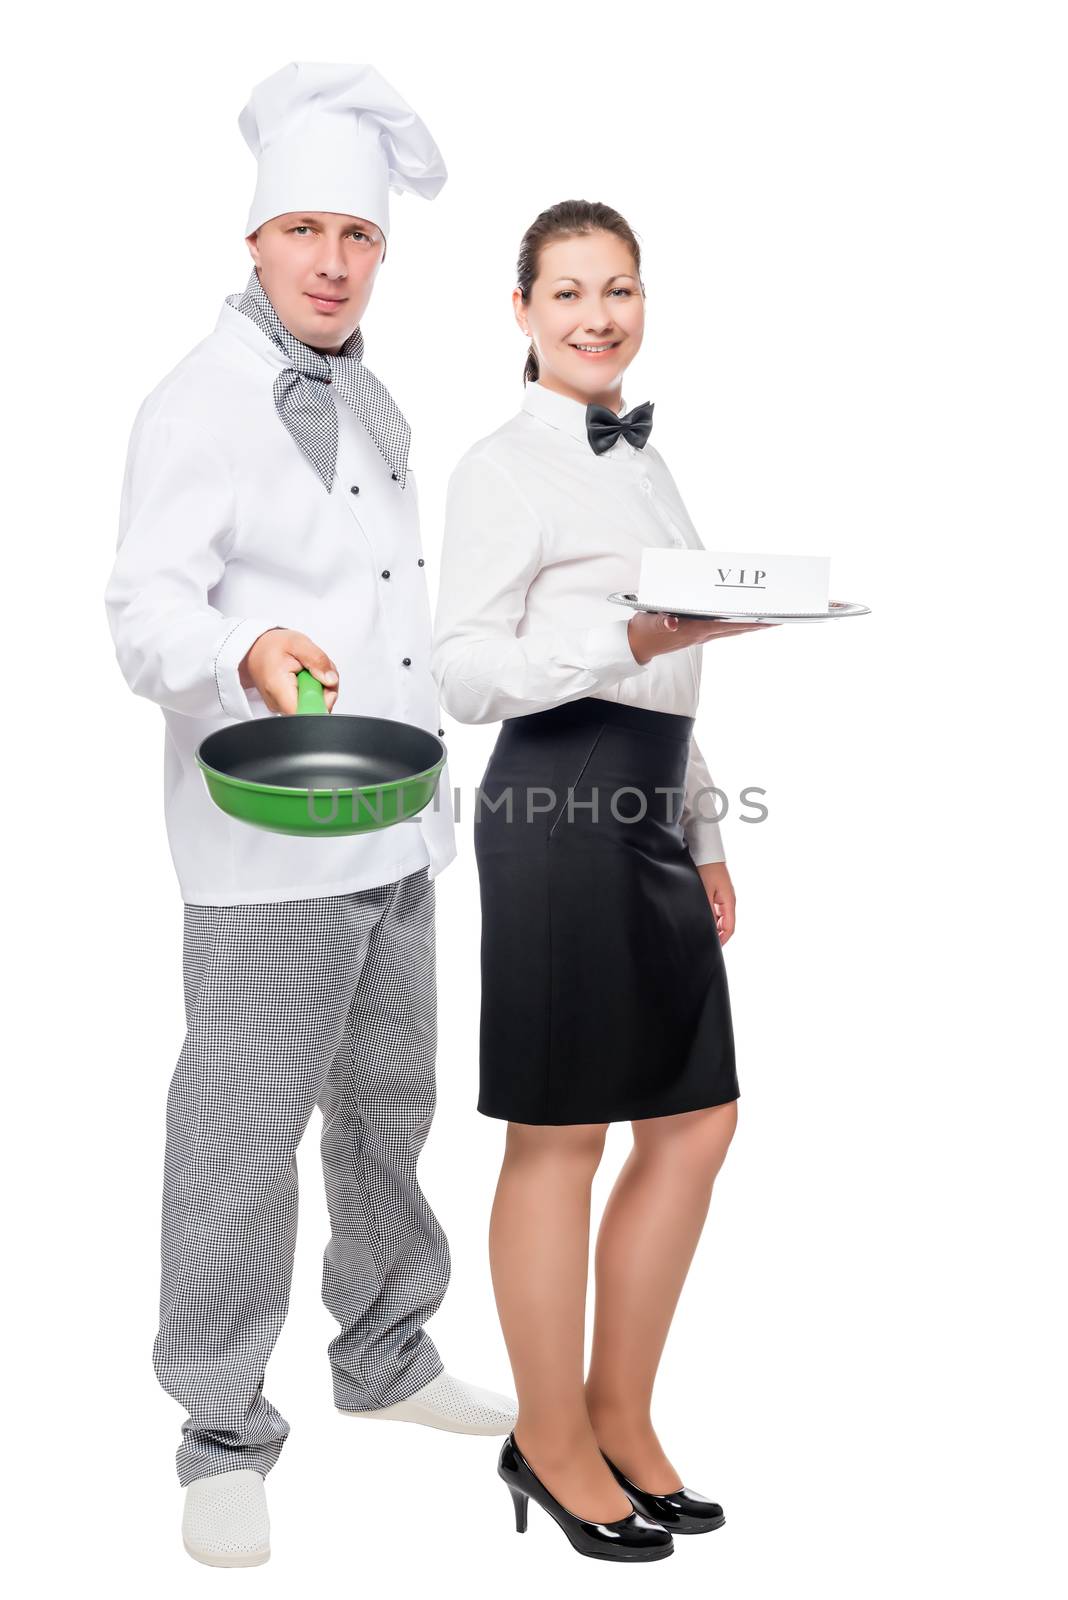 waitress and chef with cooking utensils on a white background in studio